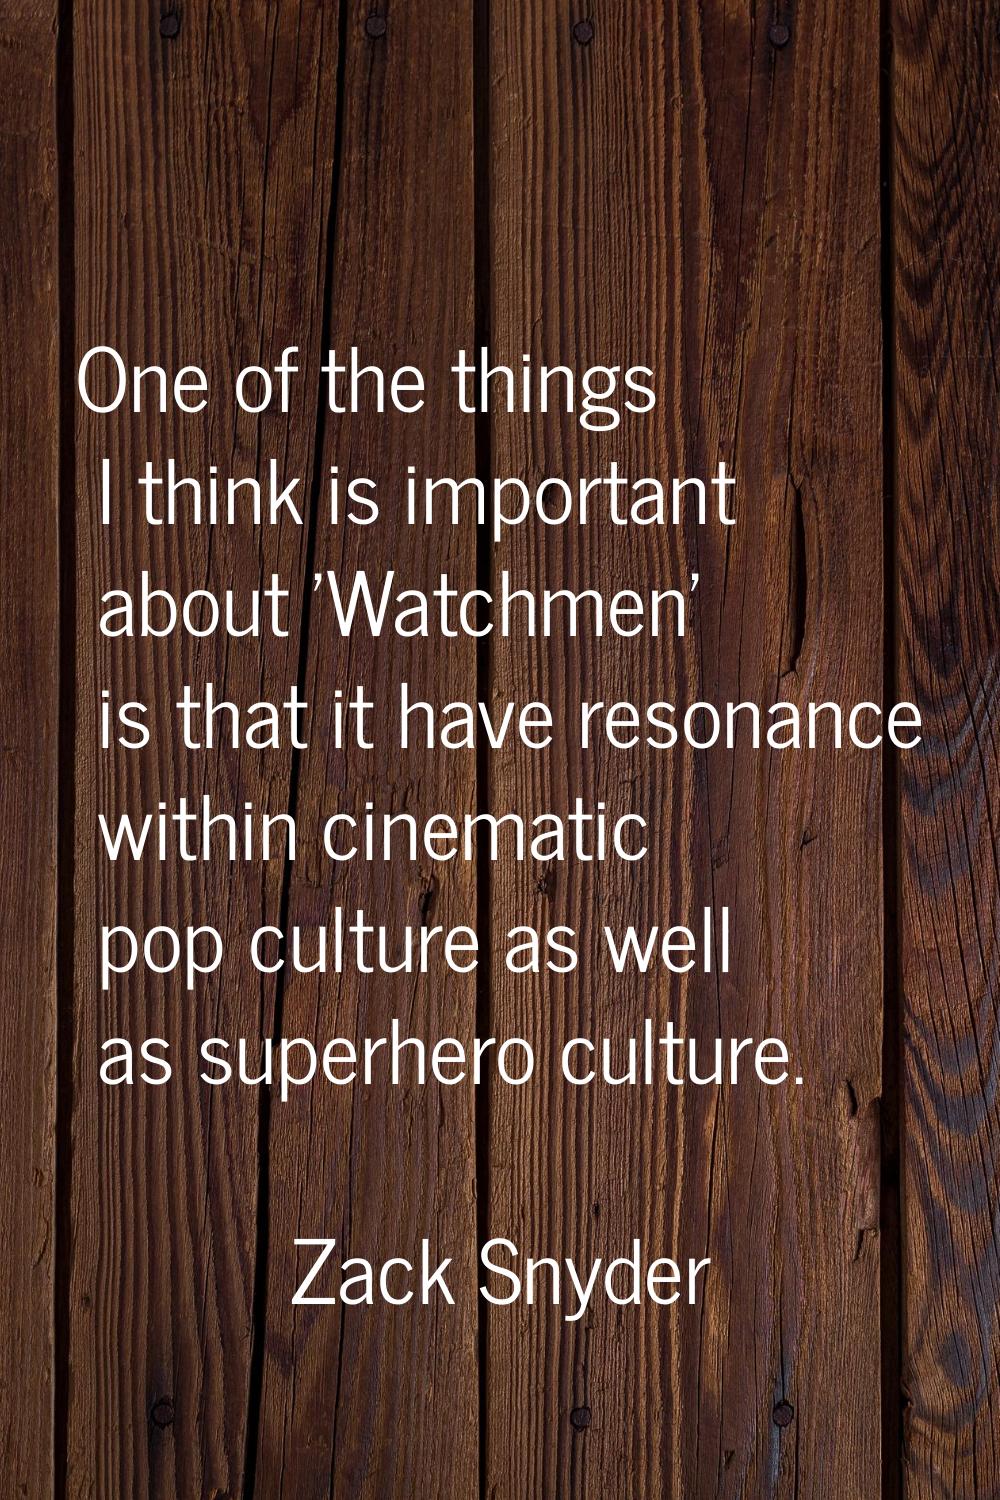 One of the things I think is important about 'Watchmen' is that it have resonance within cinematic 